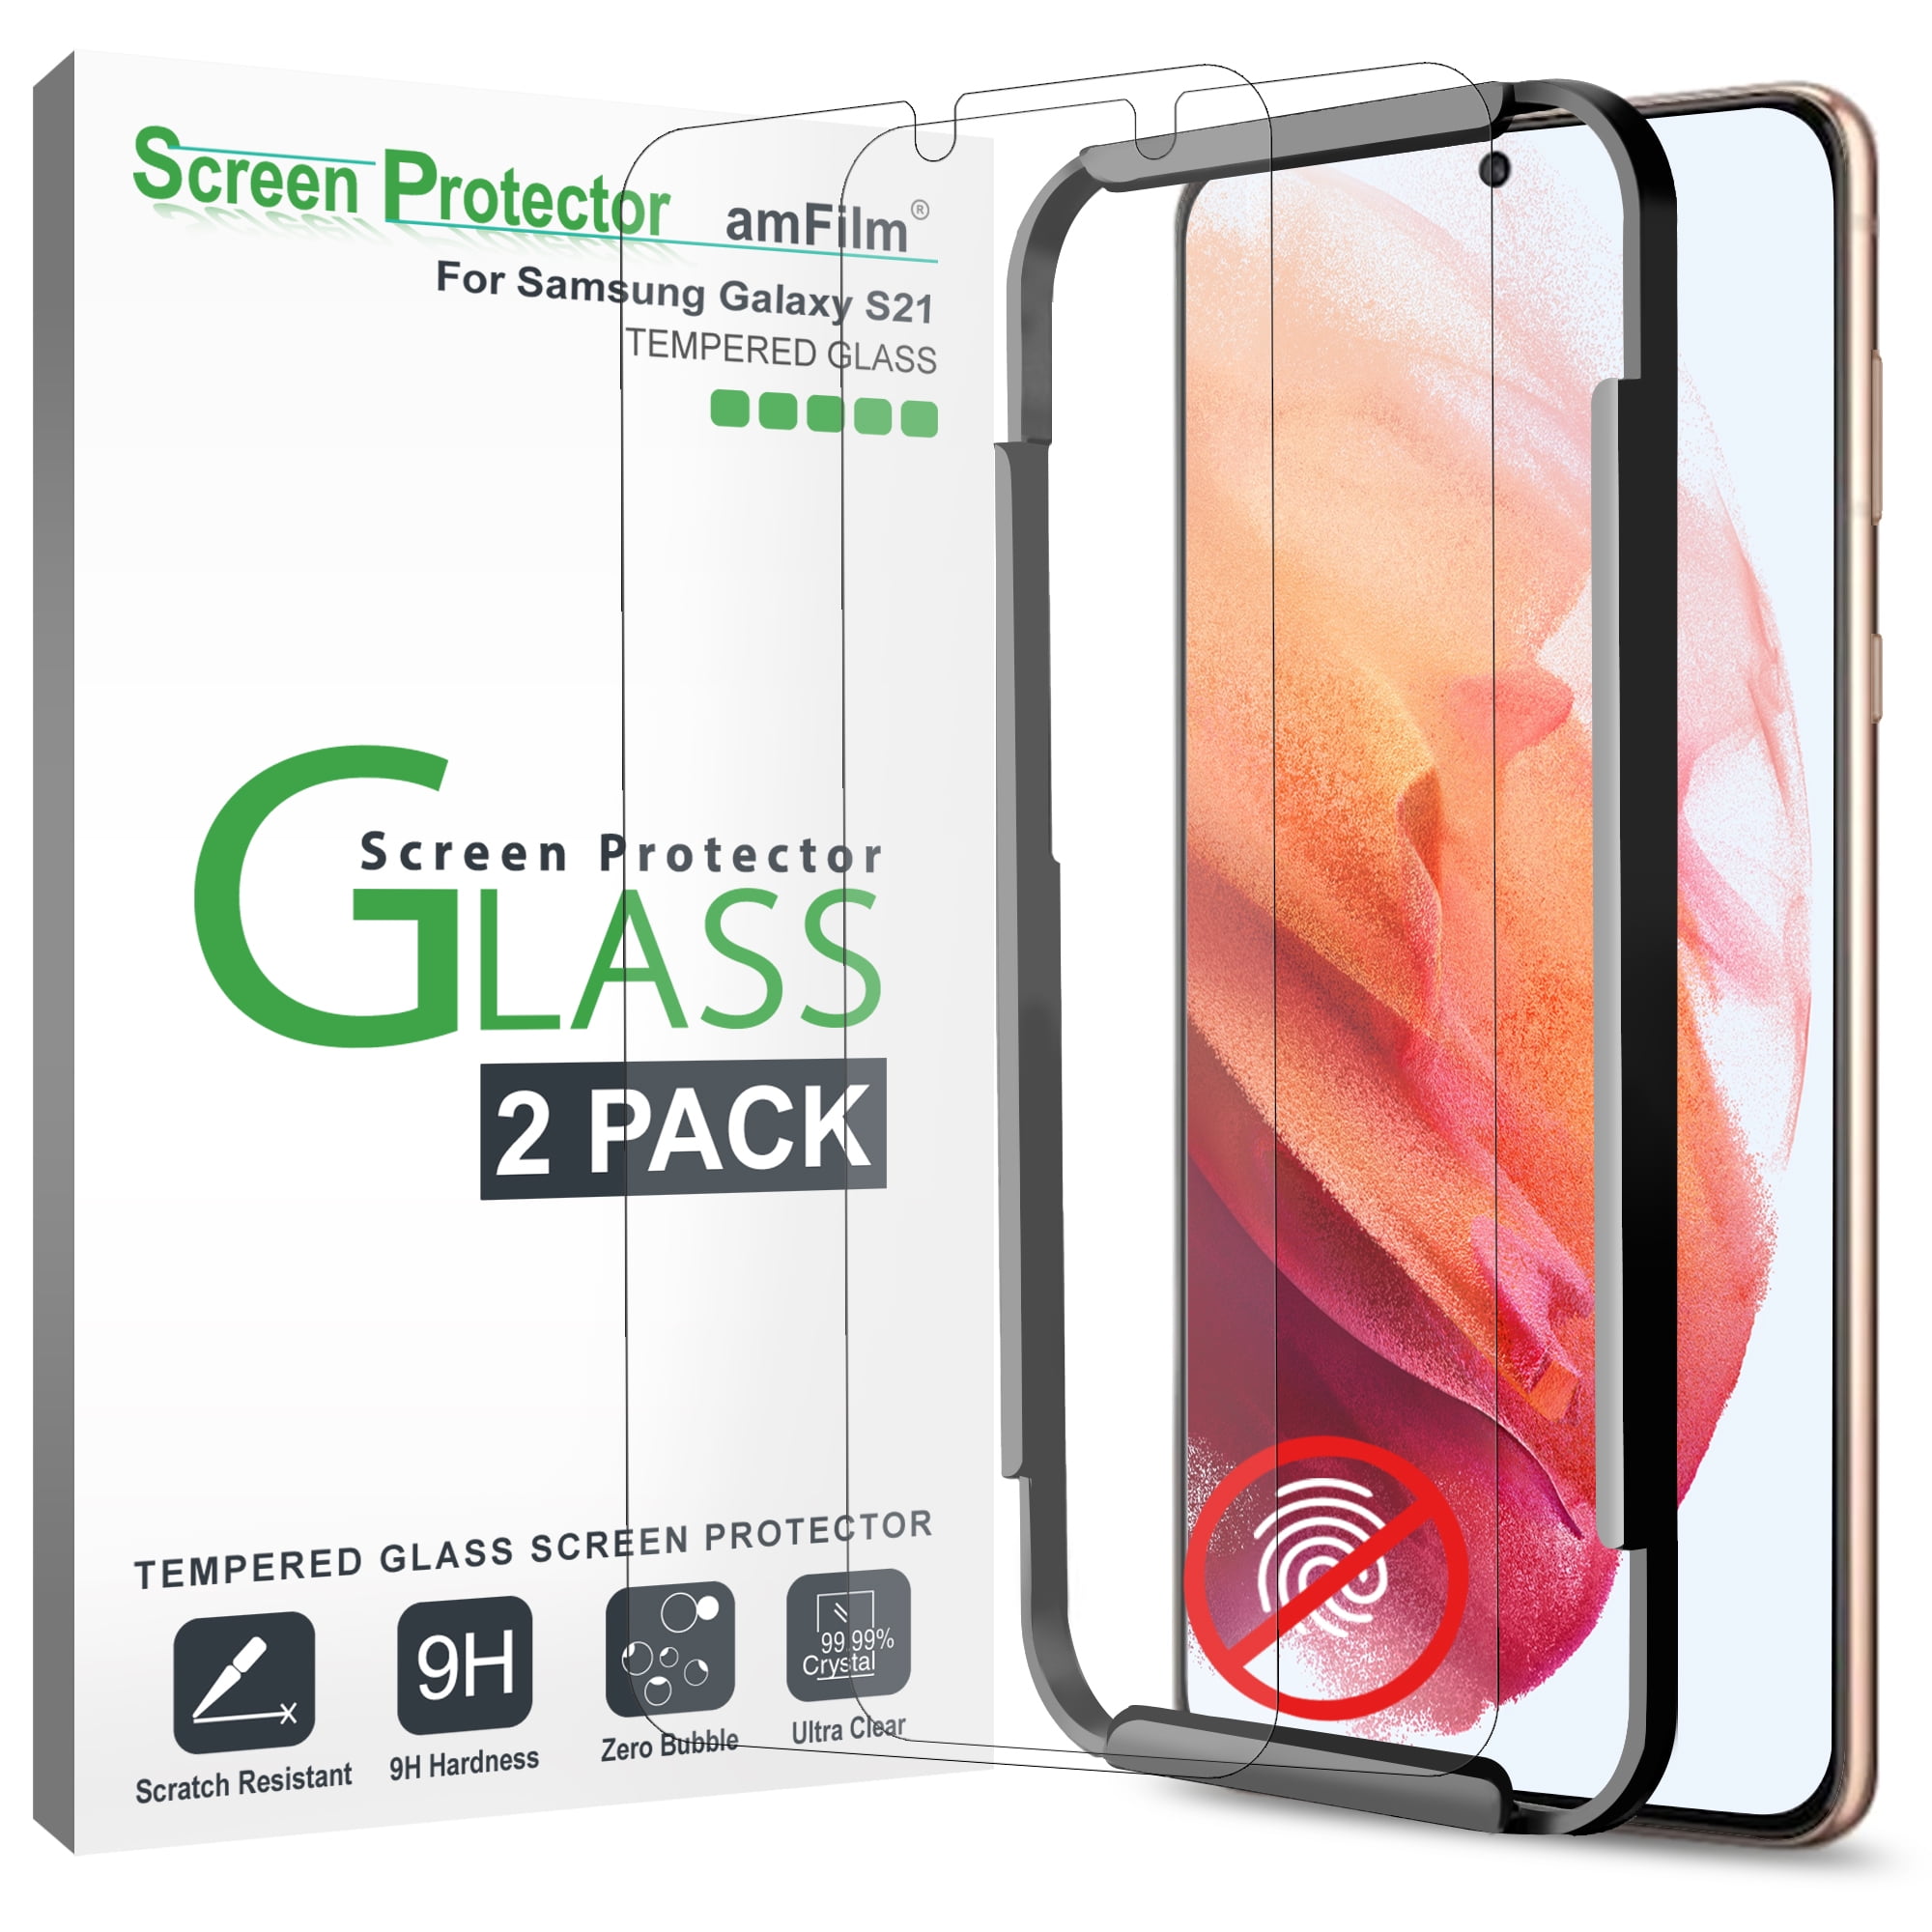 100% fits Display Protection Film Savvies Crystalclear Screen Protector for O2 XDA Zest Protective Film